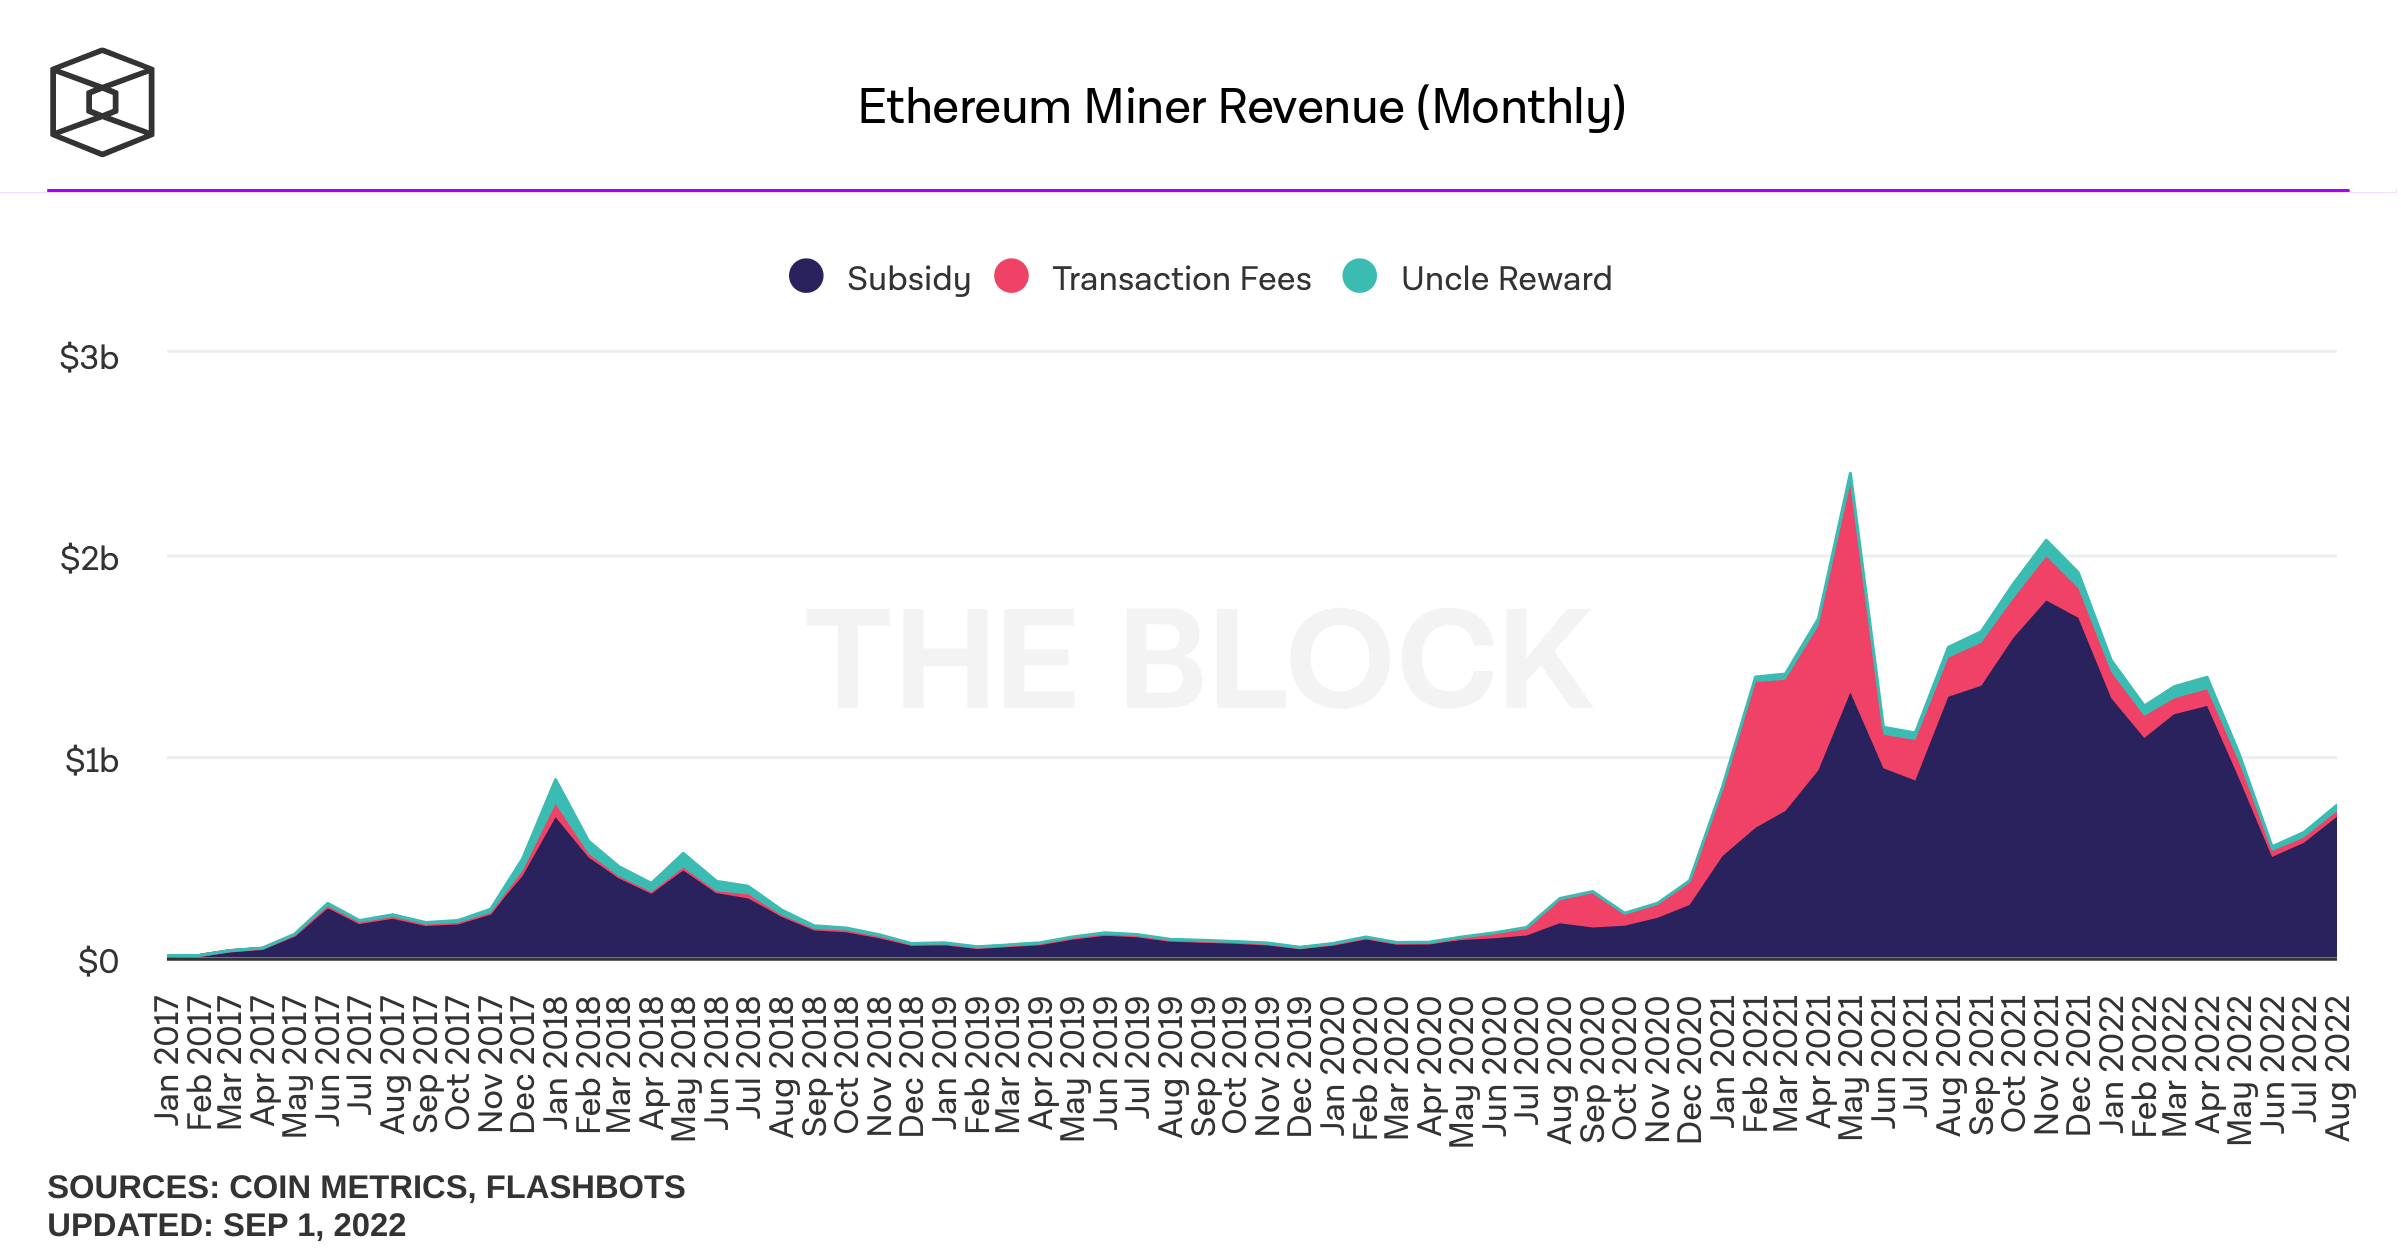 Ethereum (ETH) Miners Recorded $733 Million in Revenue in August 2022